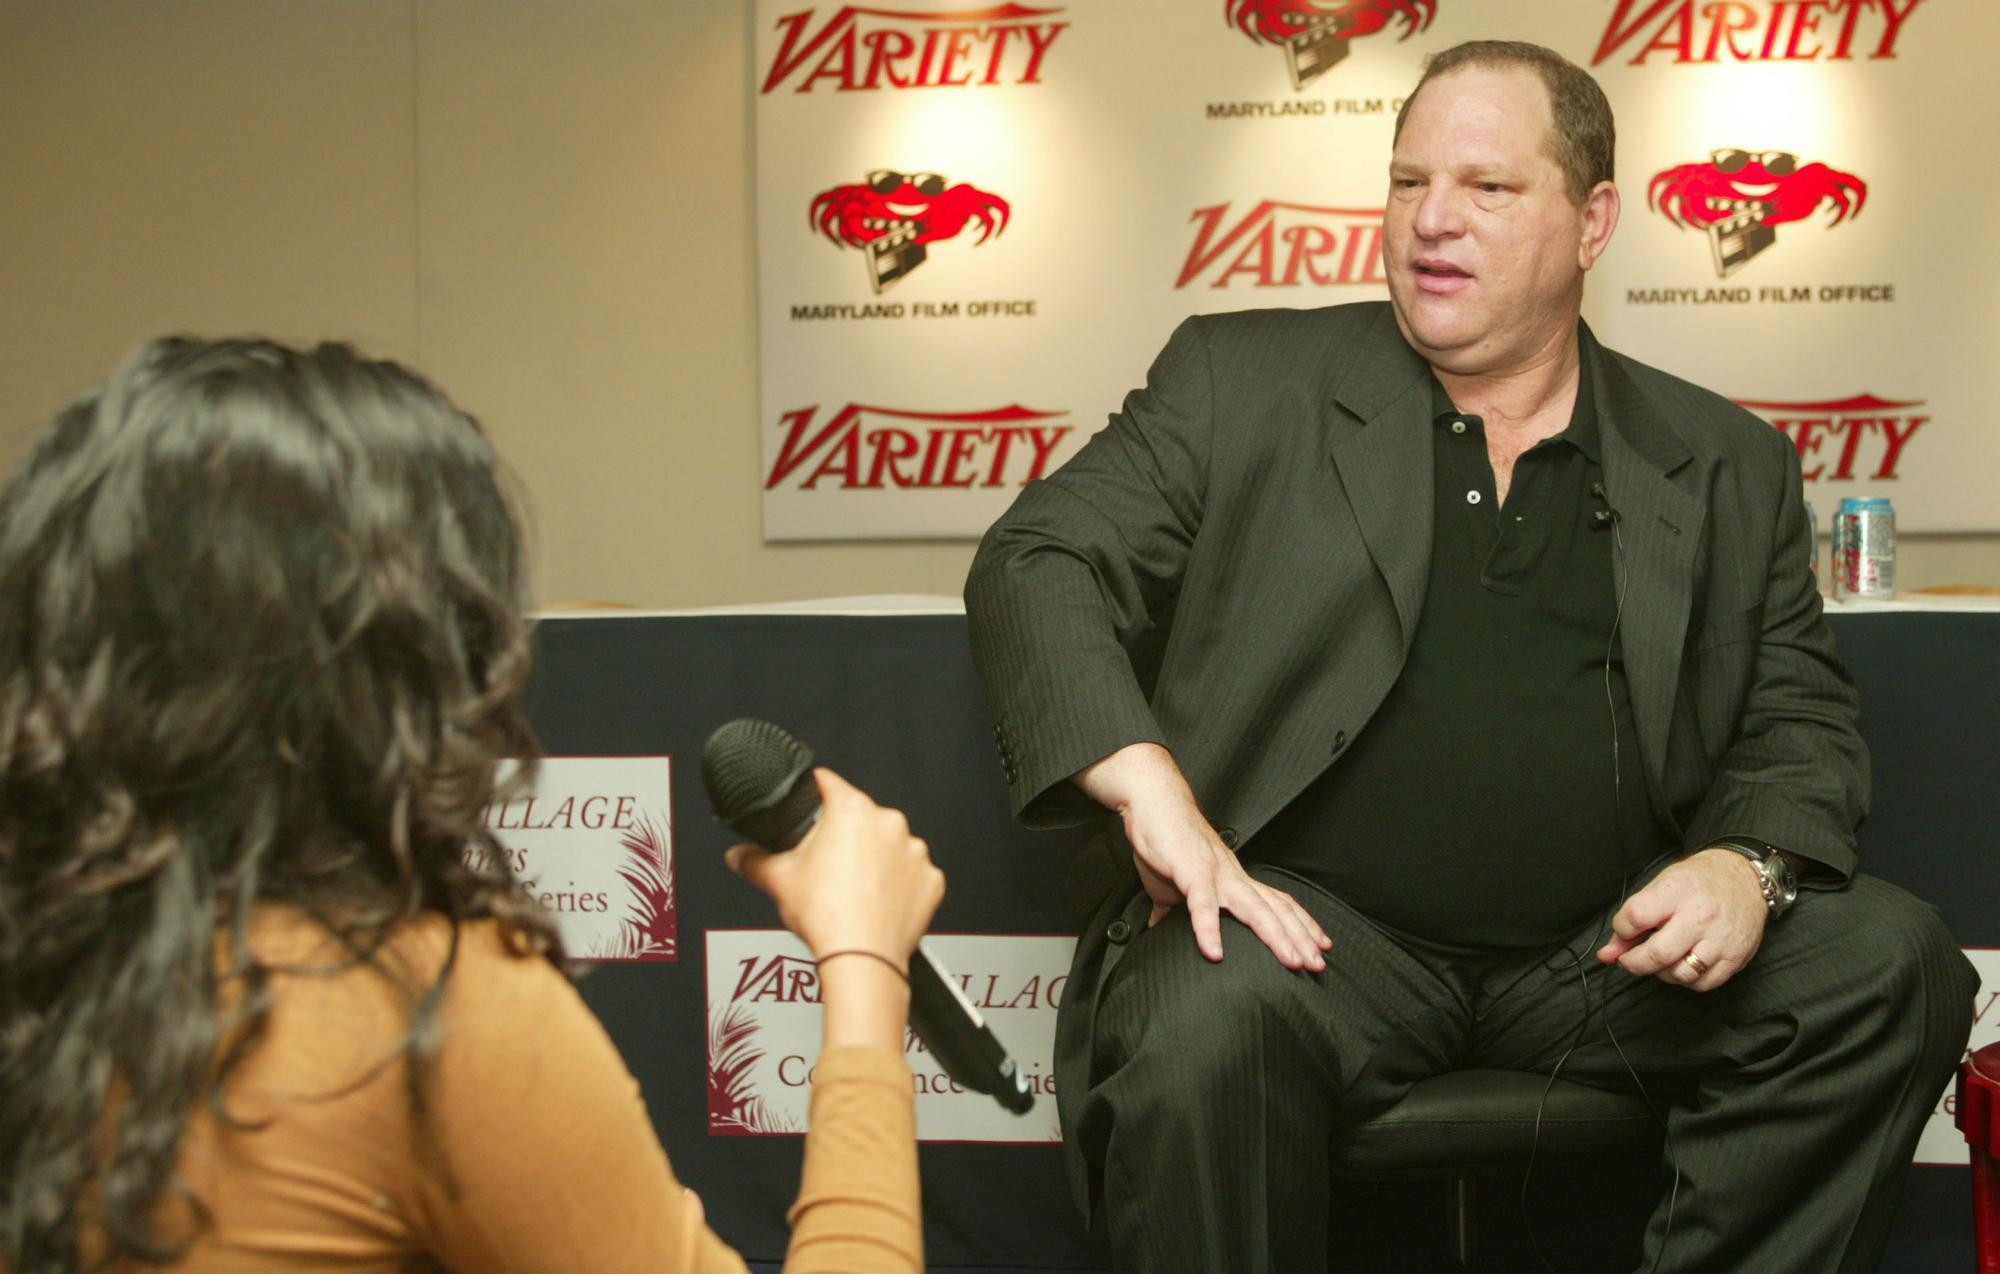 Harvey Weinstein answers questions at the 'Variety Village Cannes Conference Series' in Cannes in 2003